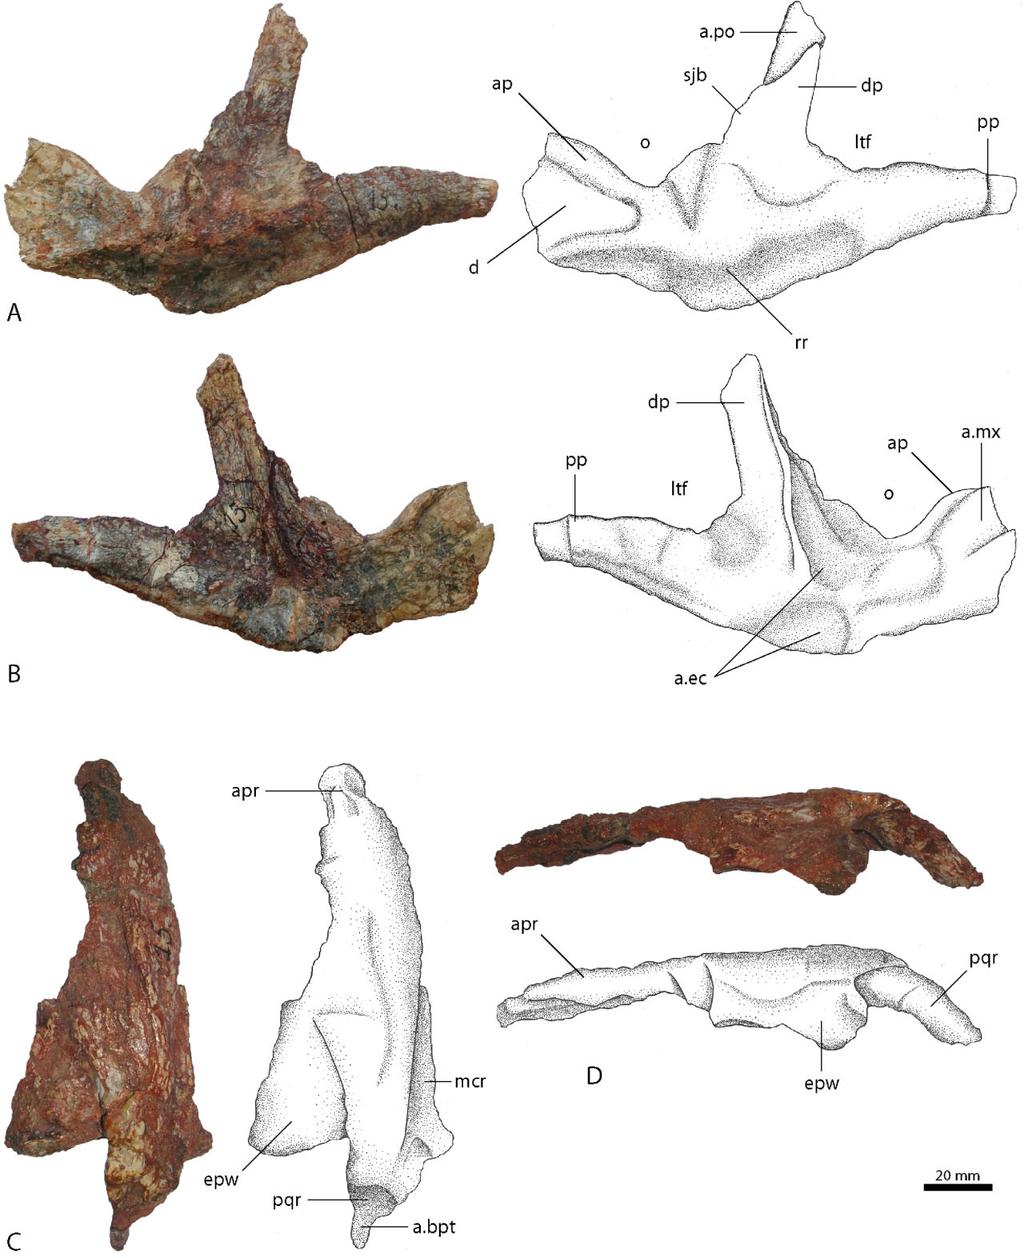 66 S. LAUTENSCHLAGER AND O. W. M. RAUHUT Figure 6. Left jugal (BSPG AS XXV 63) of Rauisuchus tiradentes in lateral view (A) and medial view (B).